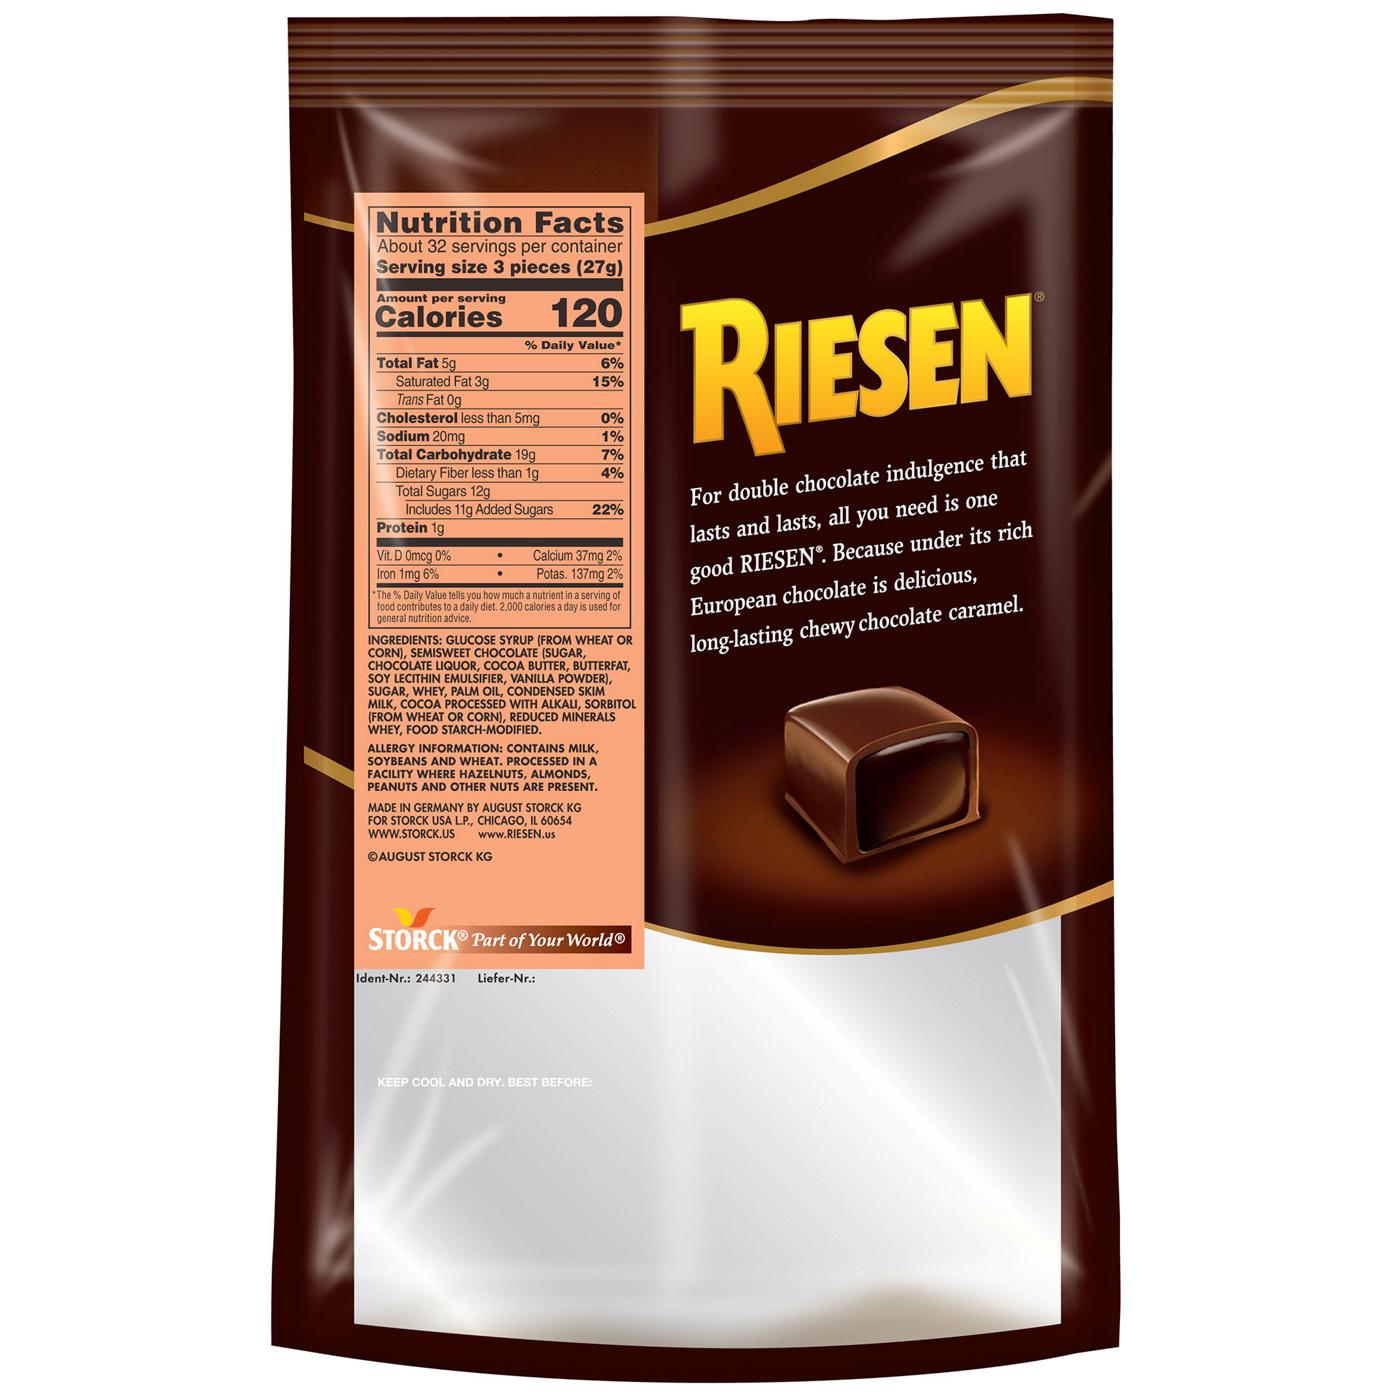 Riesen Chocolate Covered Chewy Caramel Candy; image 5 of 6